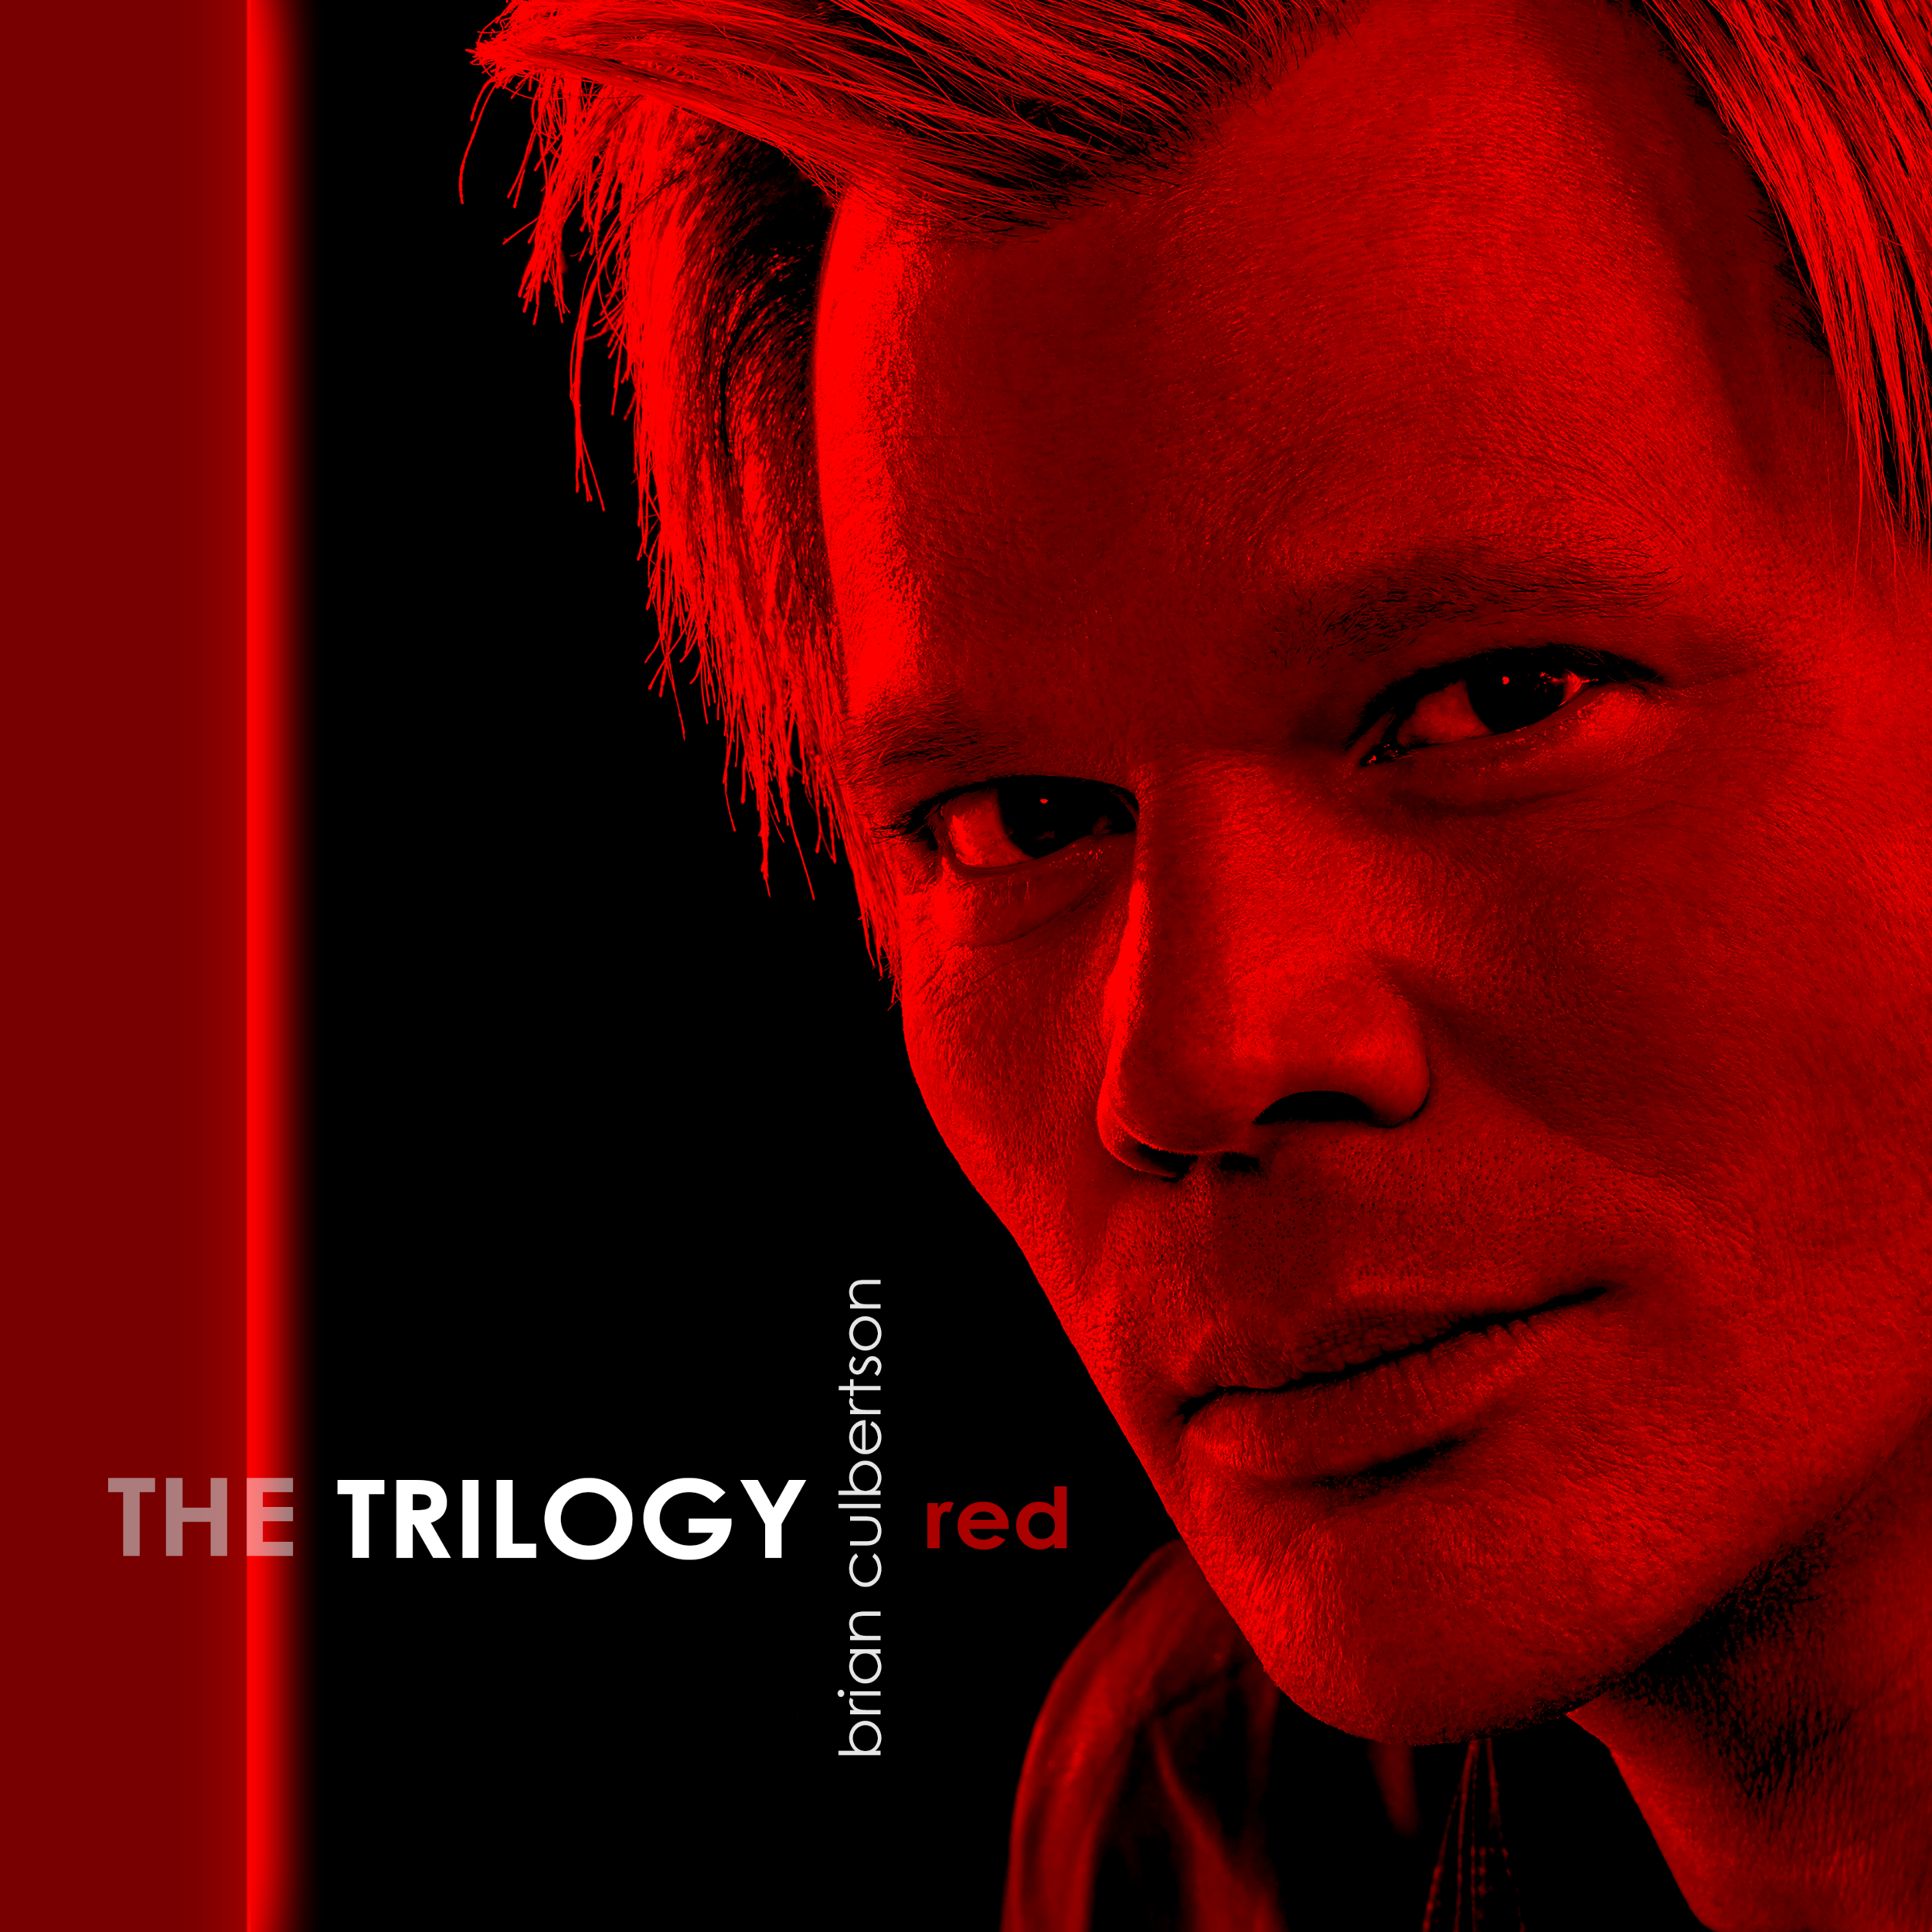 The Trilogy, Part 1: Red